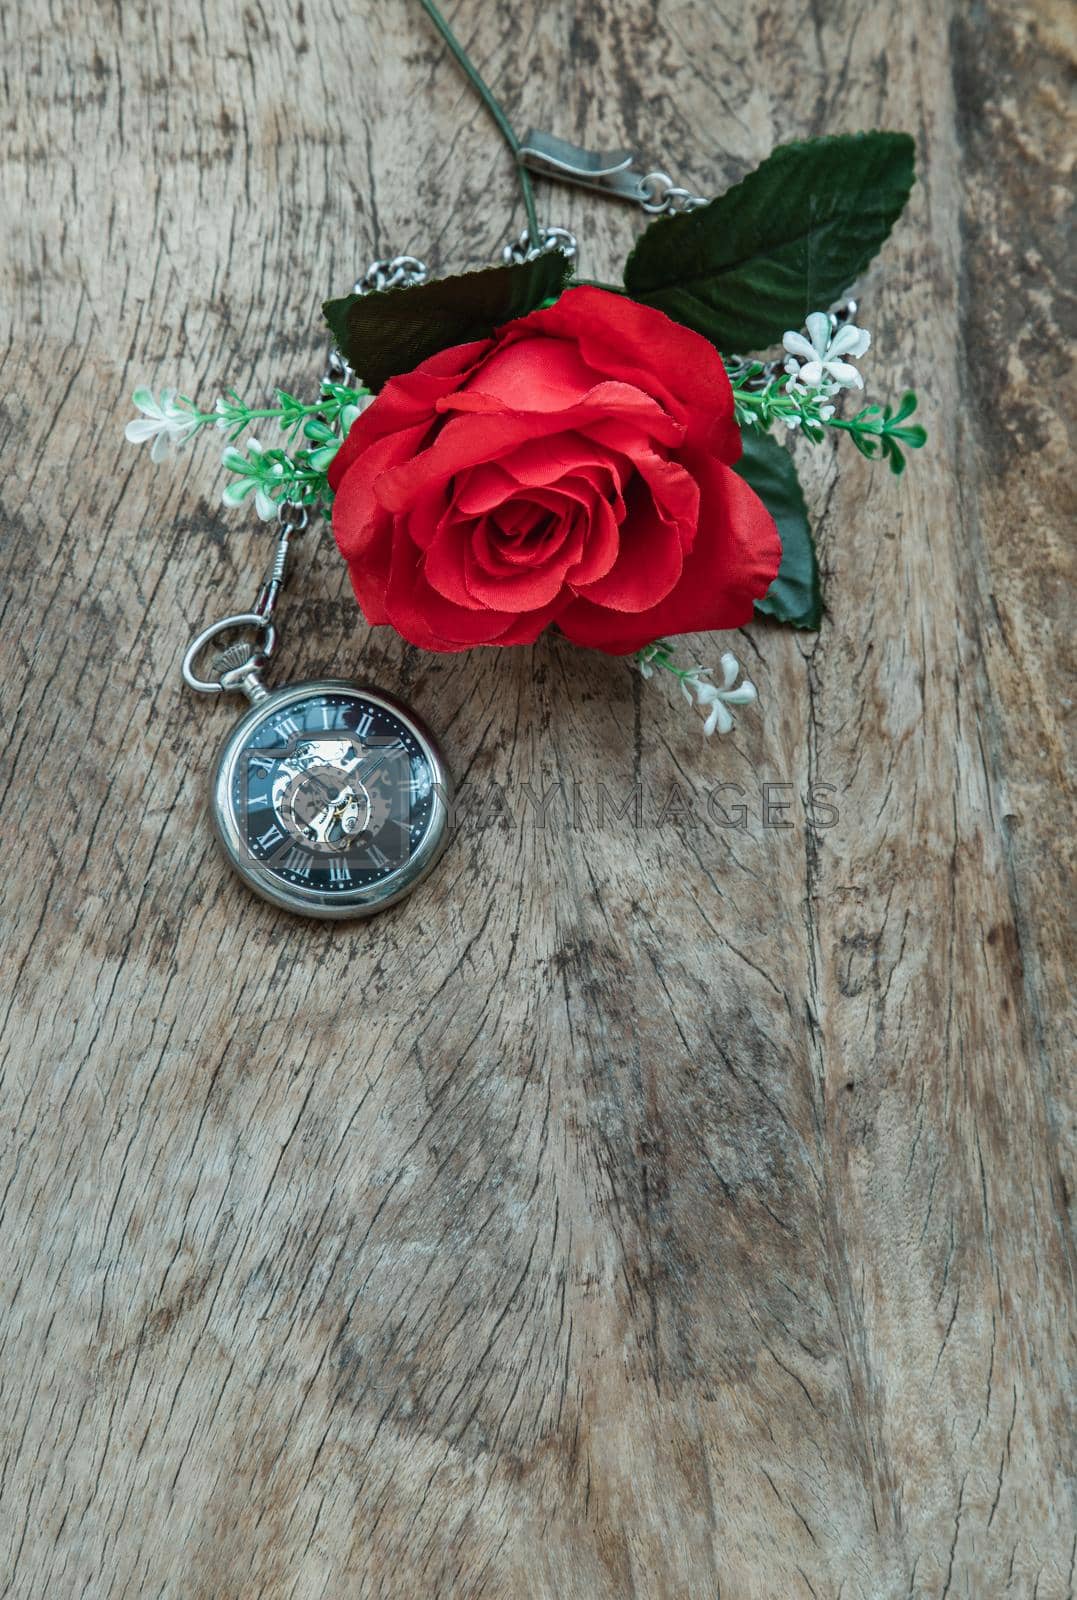 Red rose flower and A retro pocket watch on old wooden board background. Copy space, Selective focus.